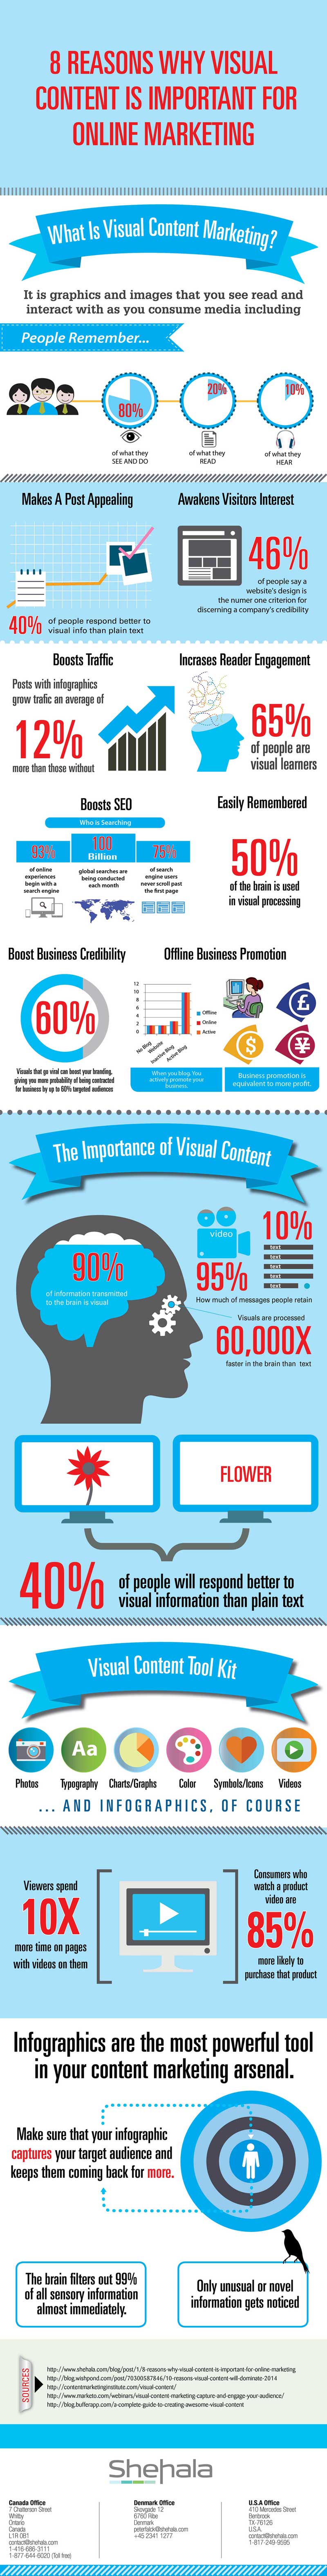 Importance of visual content for online marketing